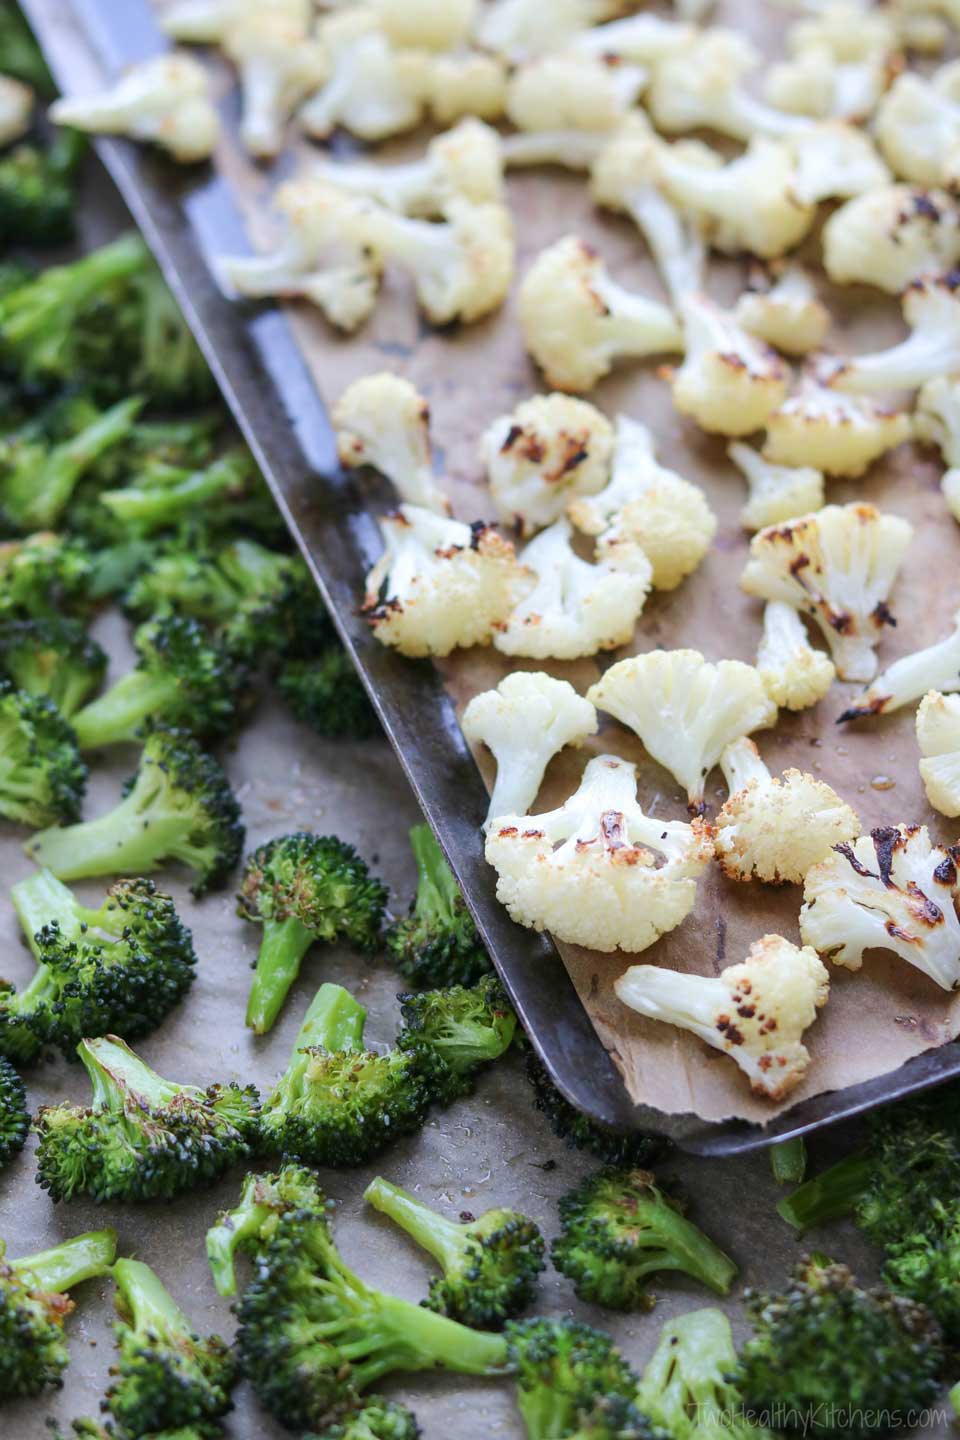 Both roasted cauliflower and roasted broccoli have loads of delicious caramelized flavor. For this pasta recipe, we roast the vegetables on separate sheet pans because the cauliflower takes slightly longer.